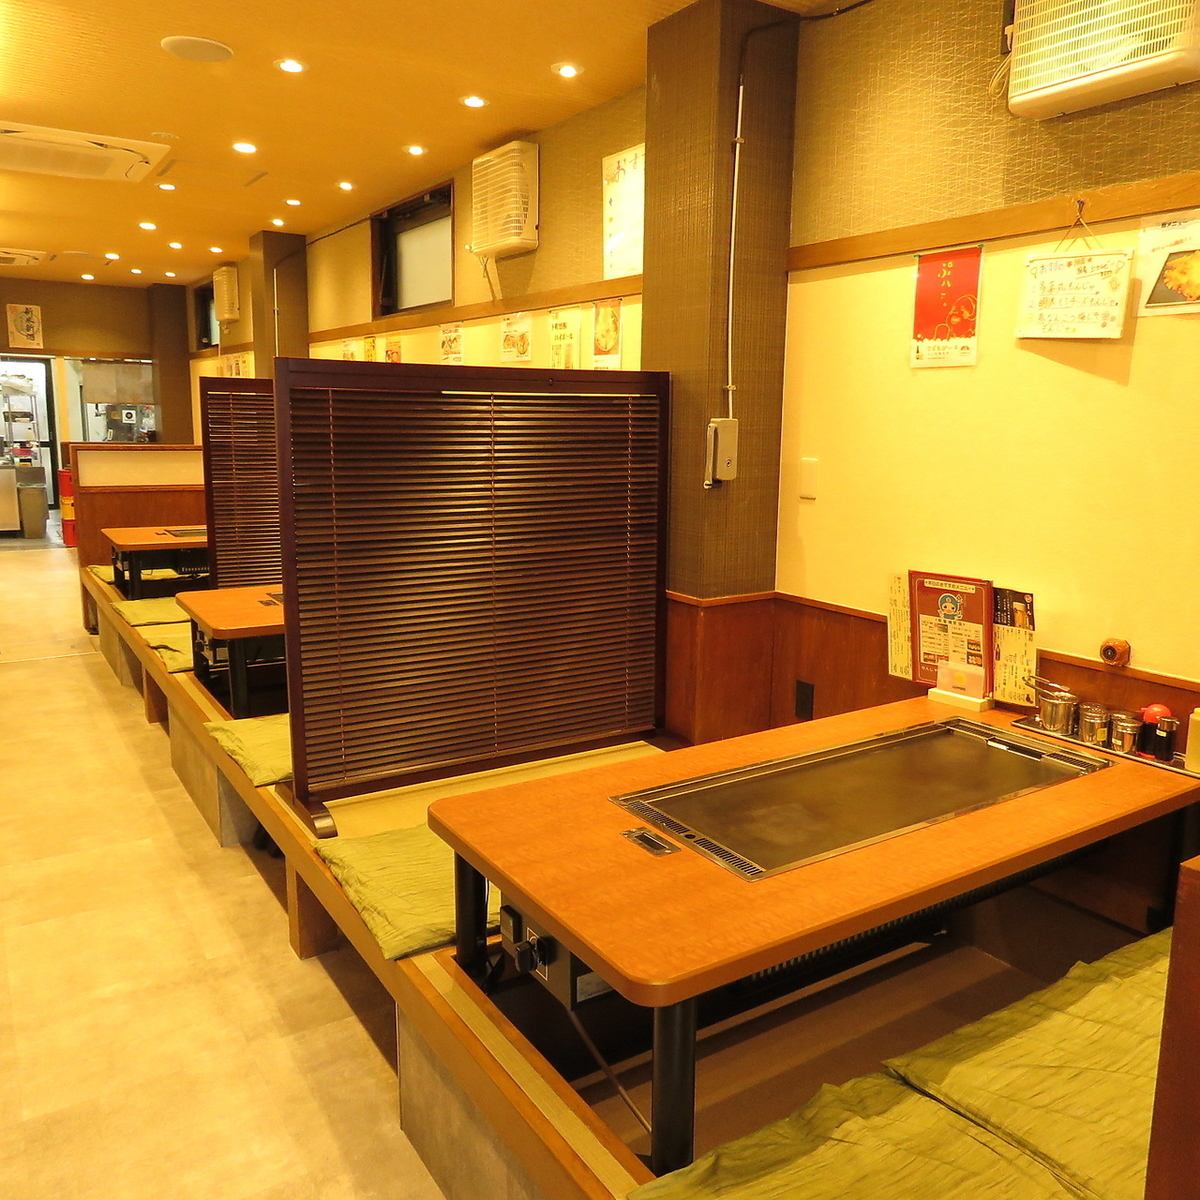 There is also a tatami room, so families are welcome to use it!